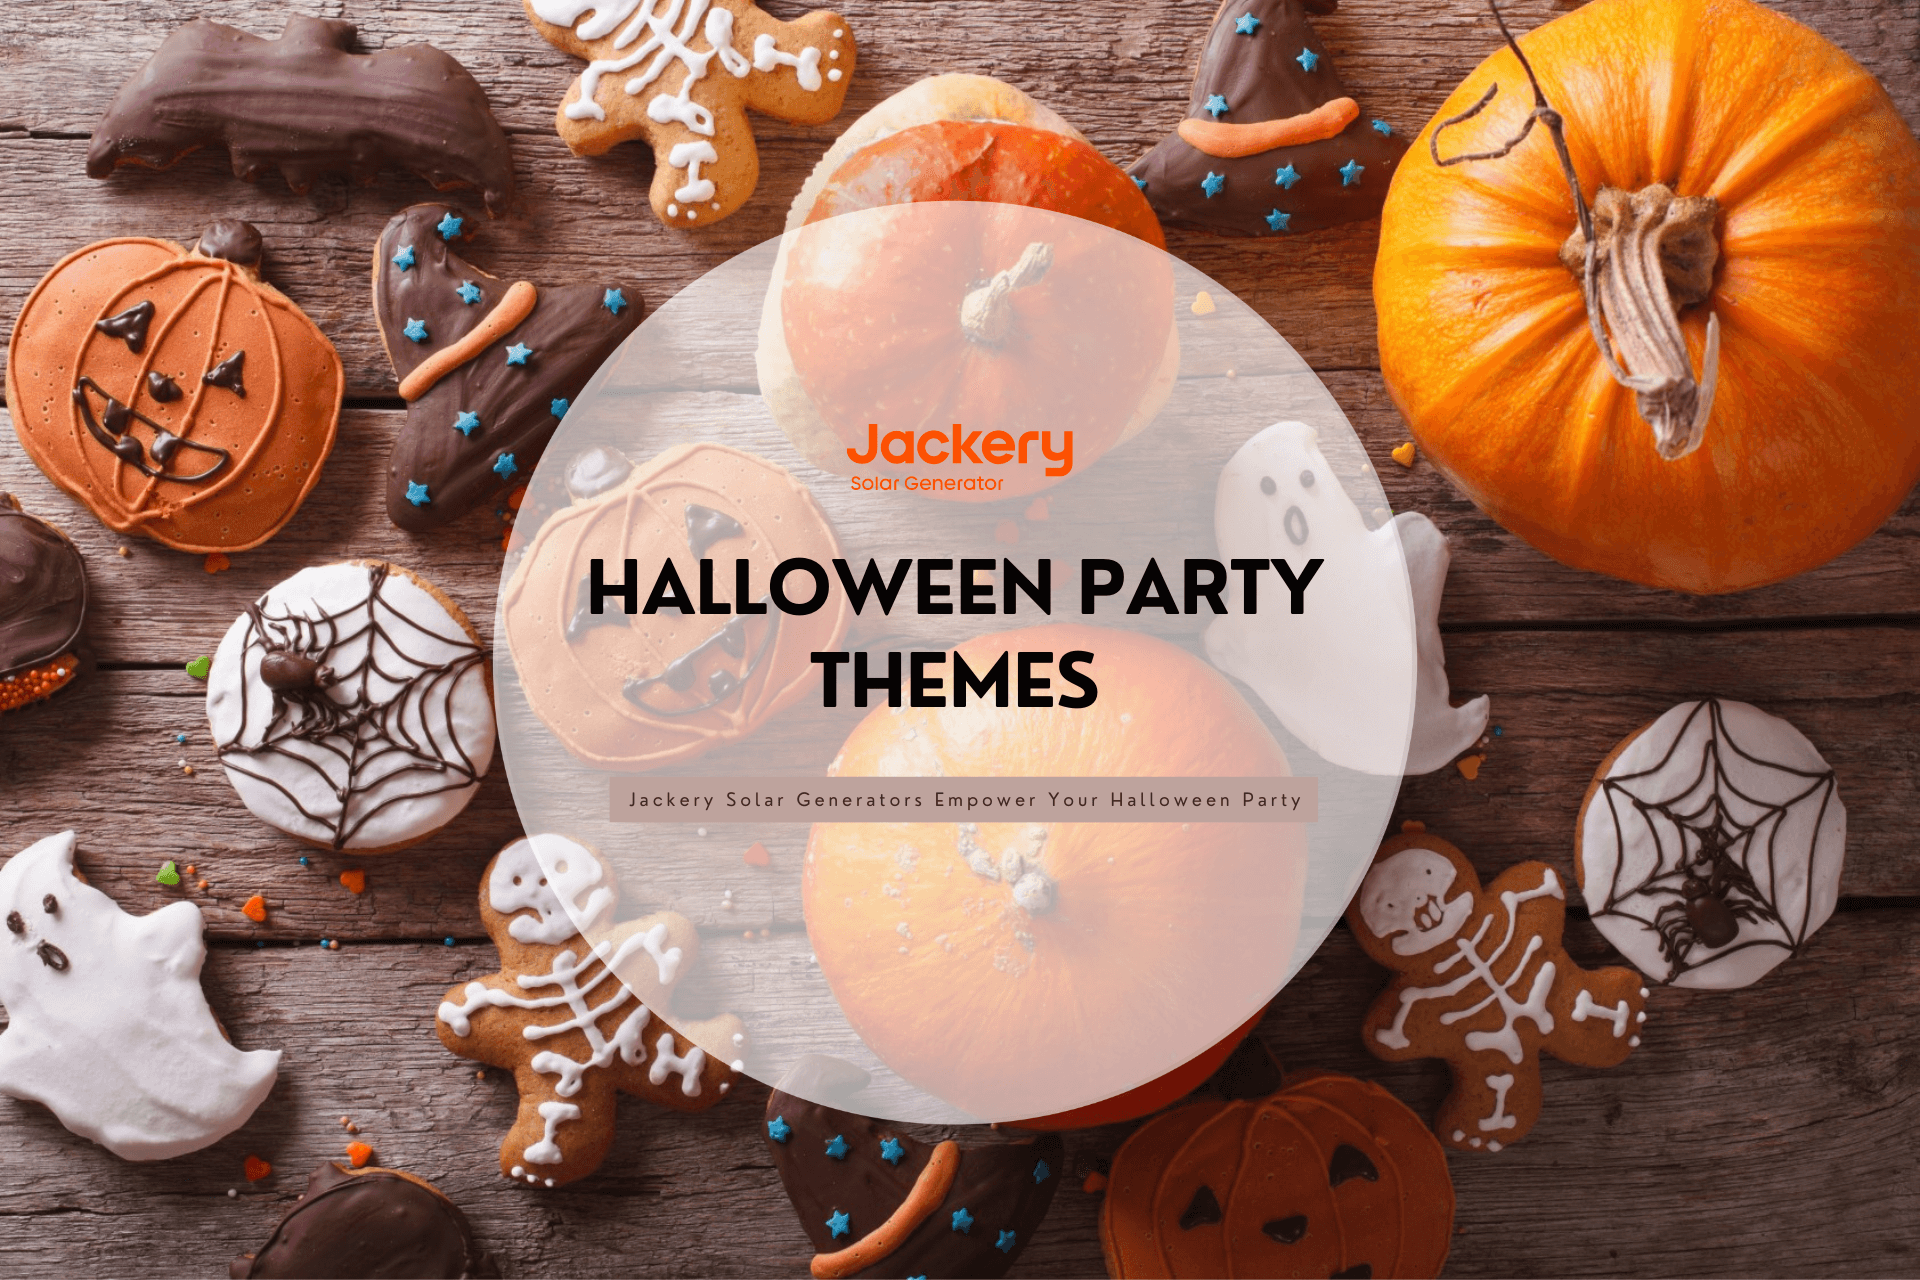 Halloween party themes